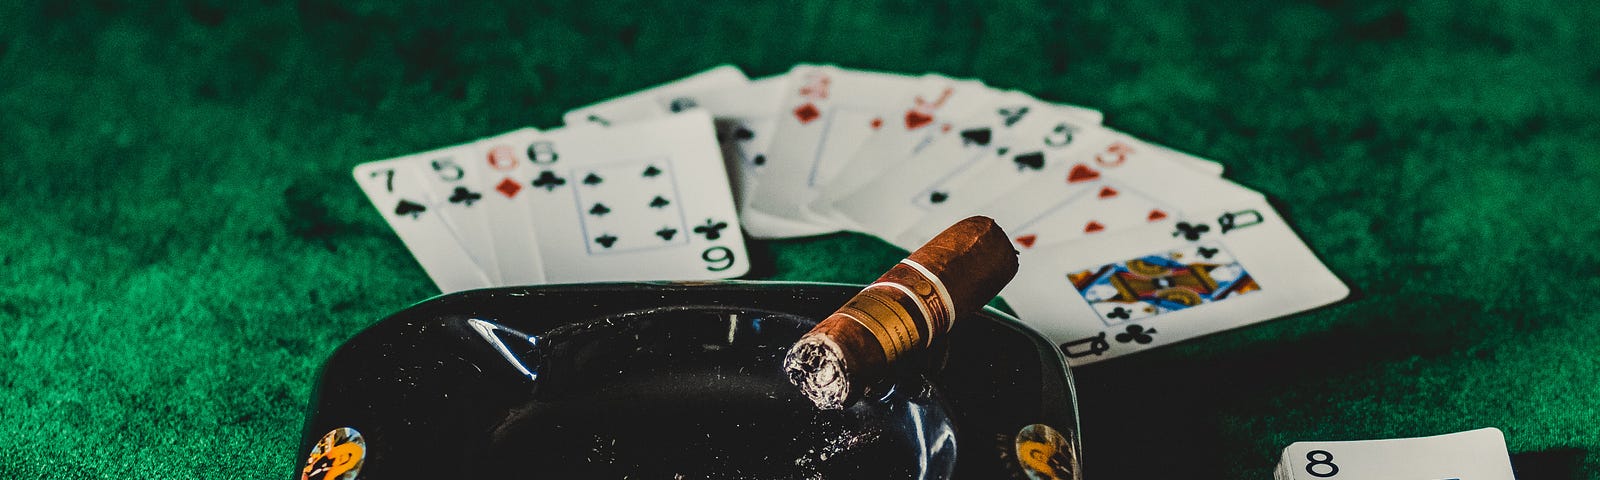 Cigar resting on an ash tray on a cards table, with cards spread out on the table.